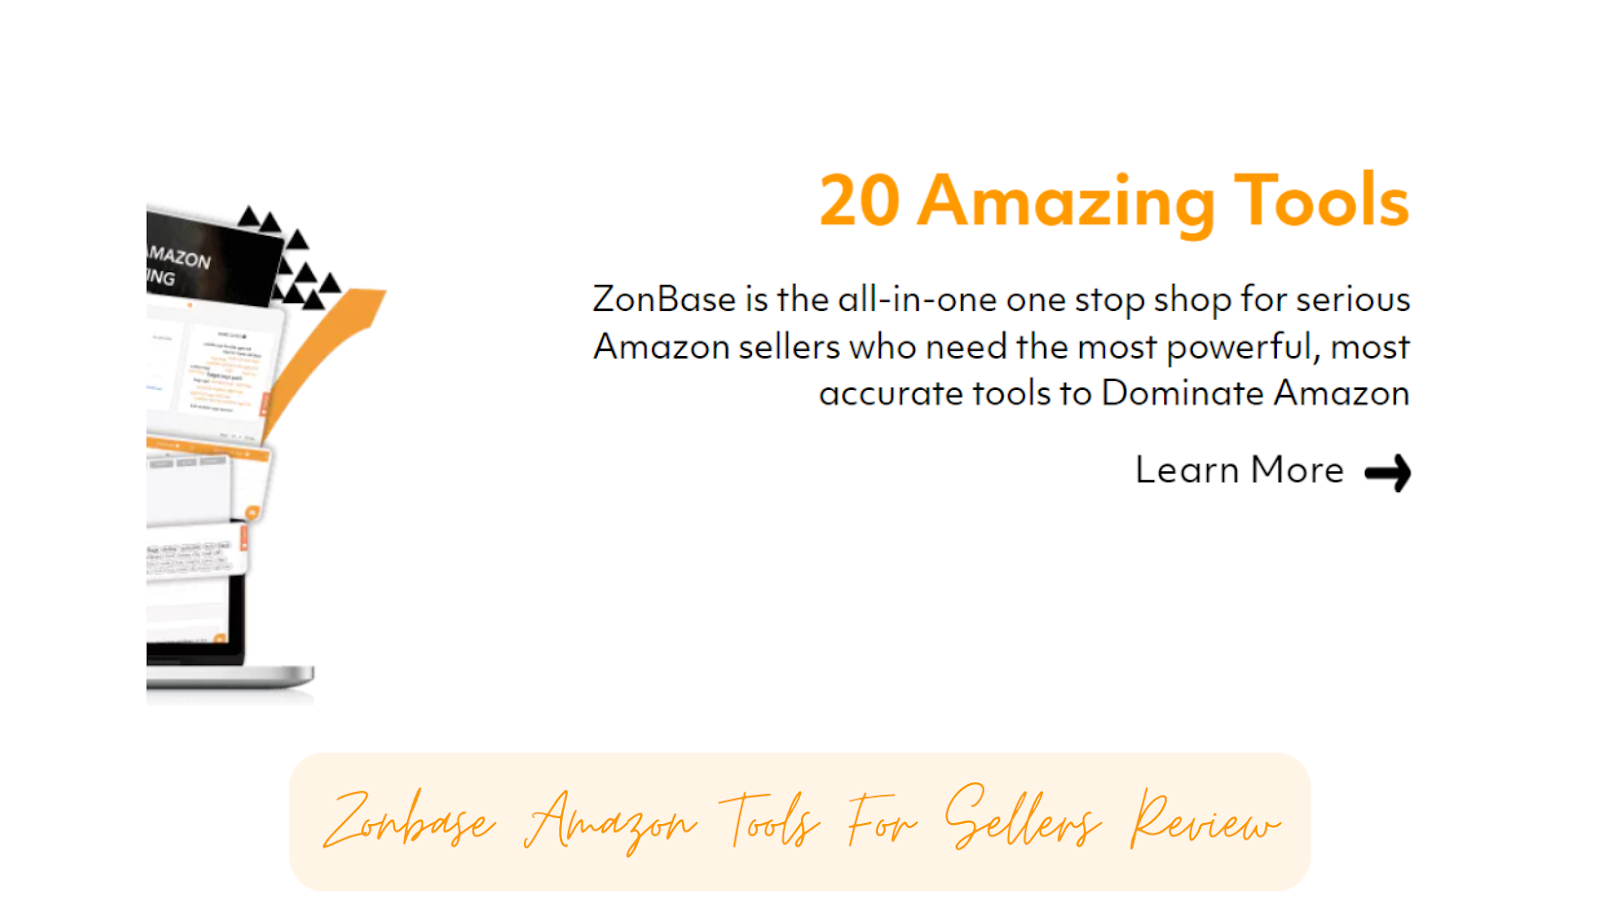 20 Amazing Tools Offered By ZonBase